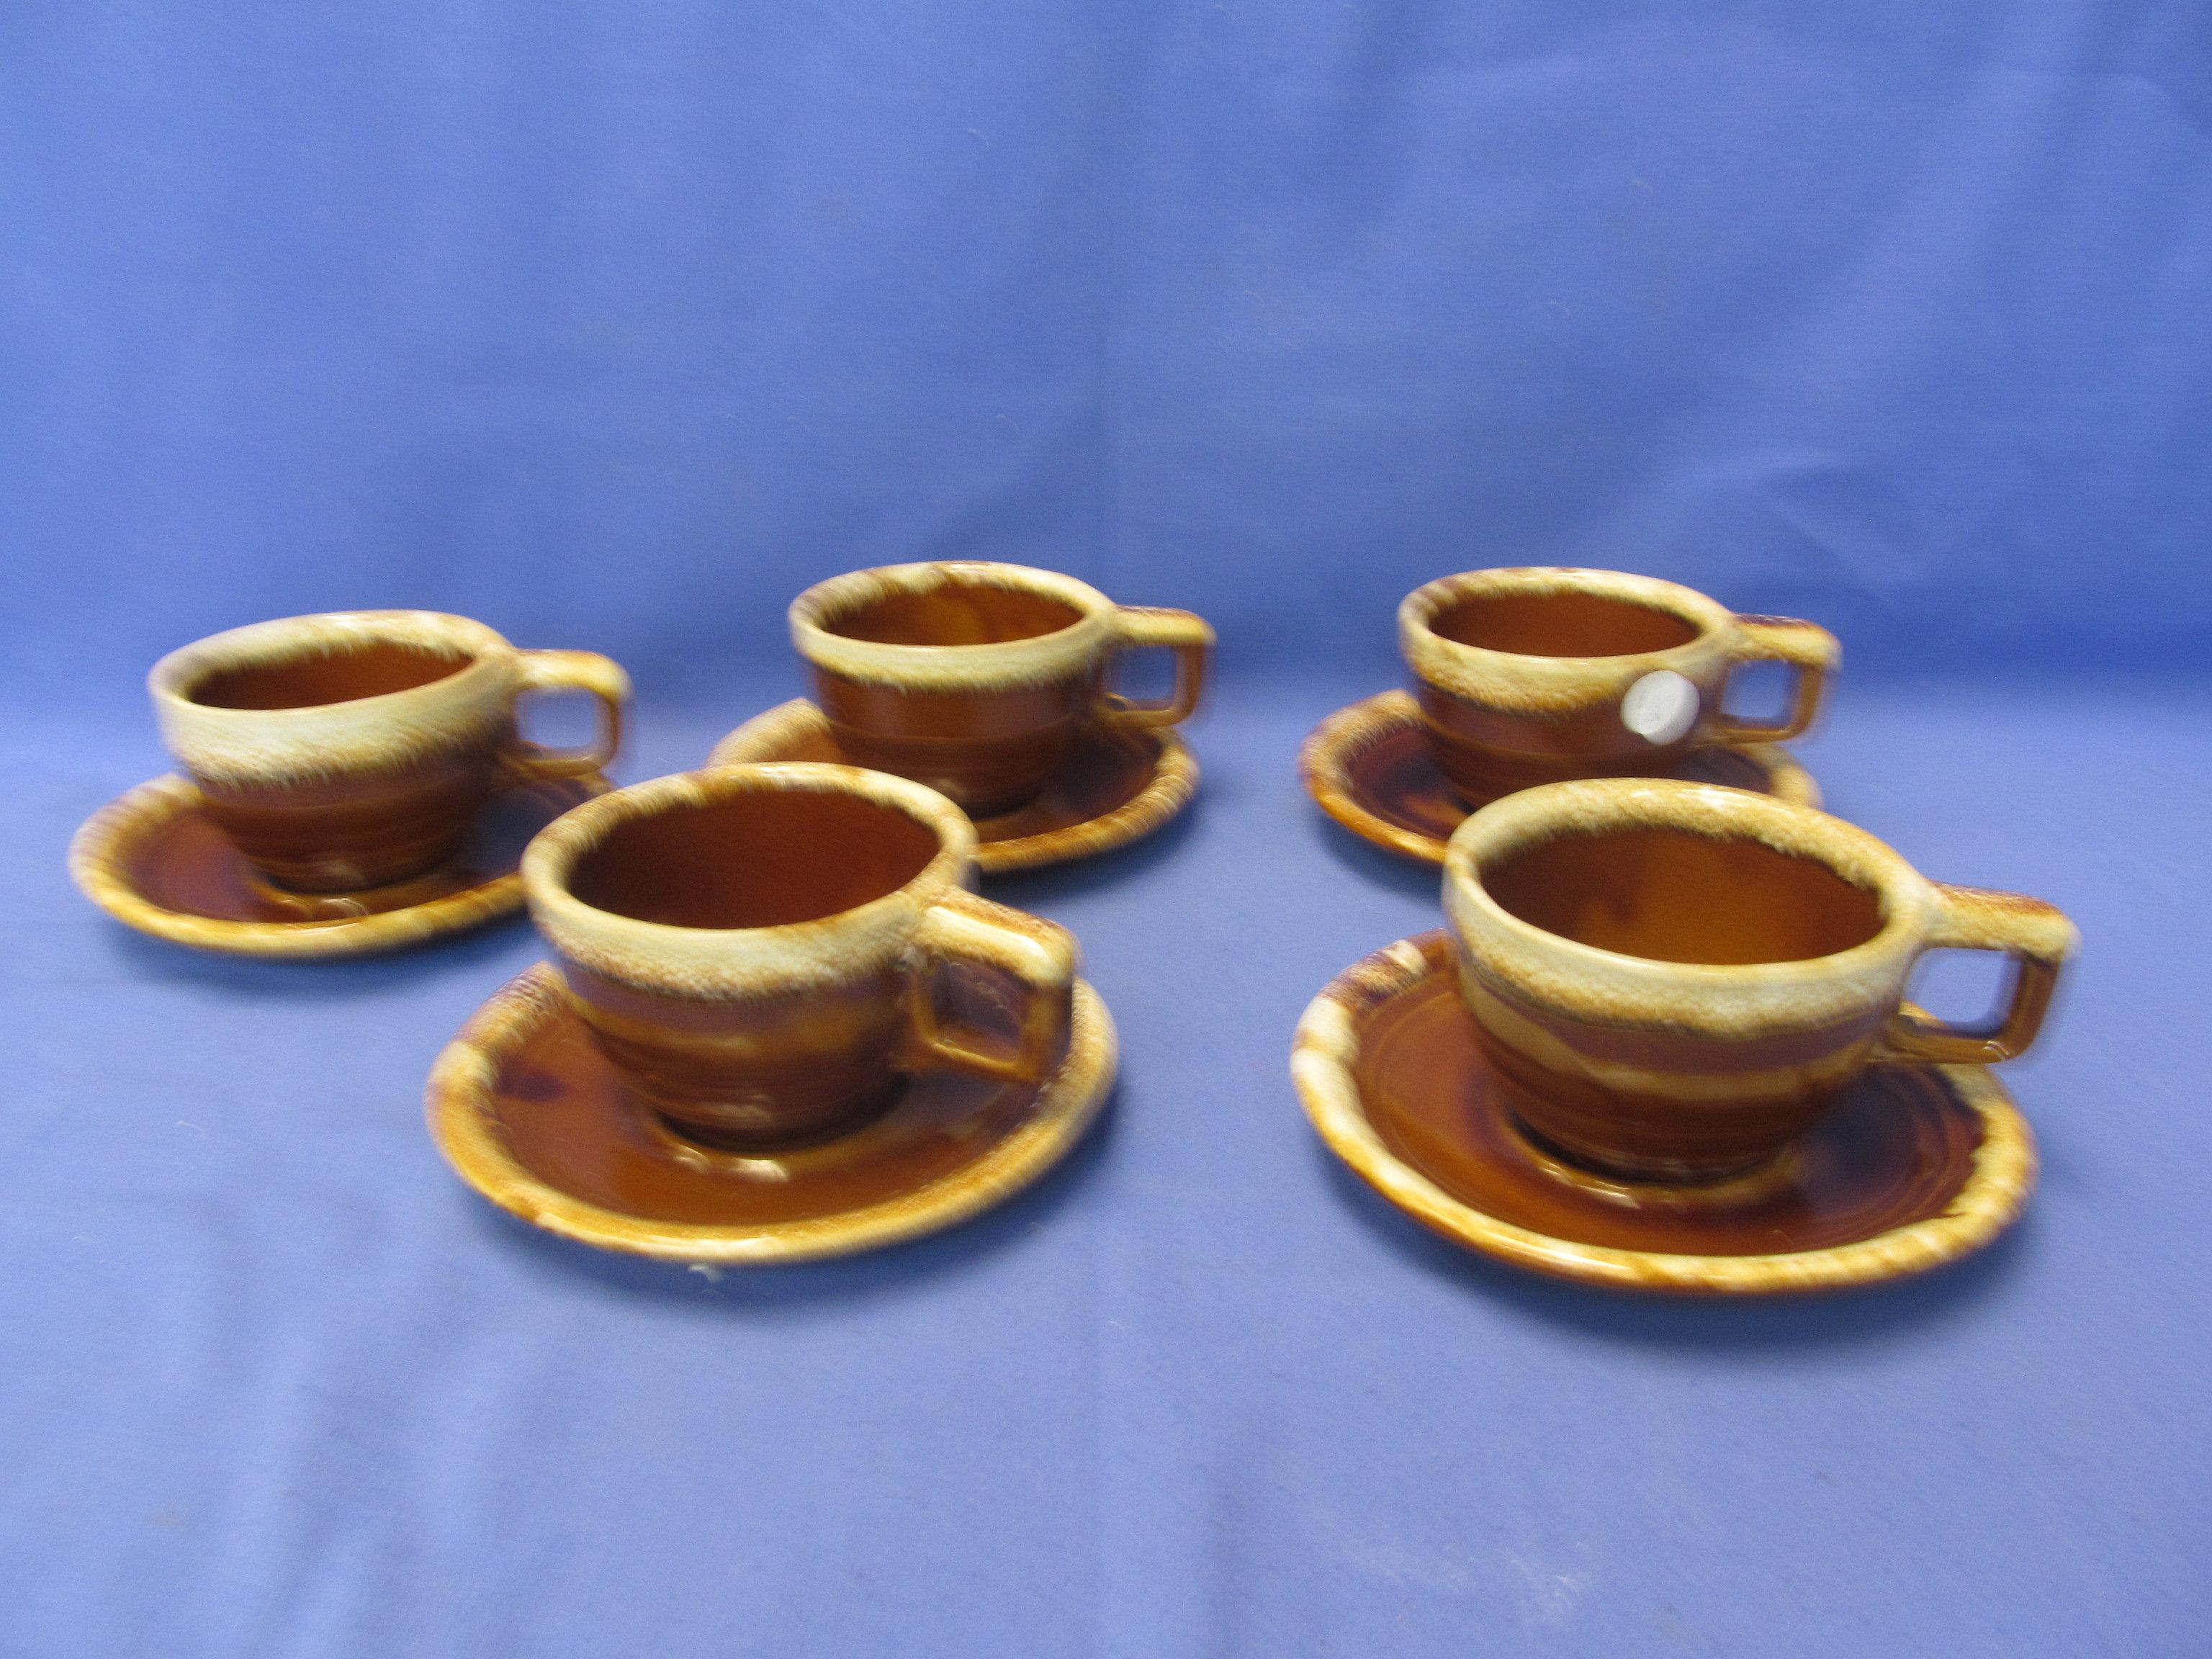 Brown Drip Monmouth Pottery: 10 Cups Round w/ Square handles, 10 Saucers,  5 Dinner Plates & 1 Ramek